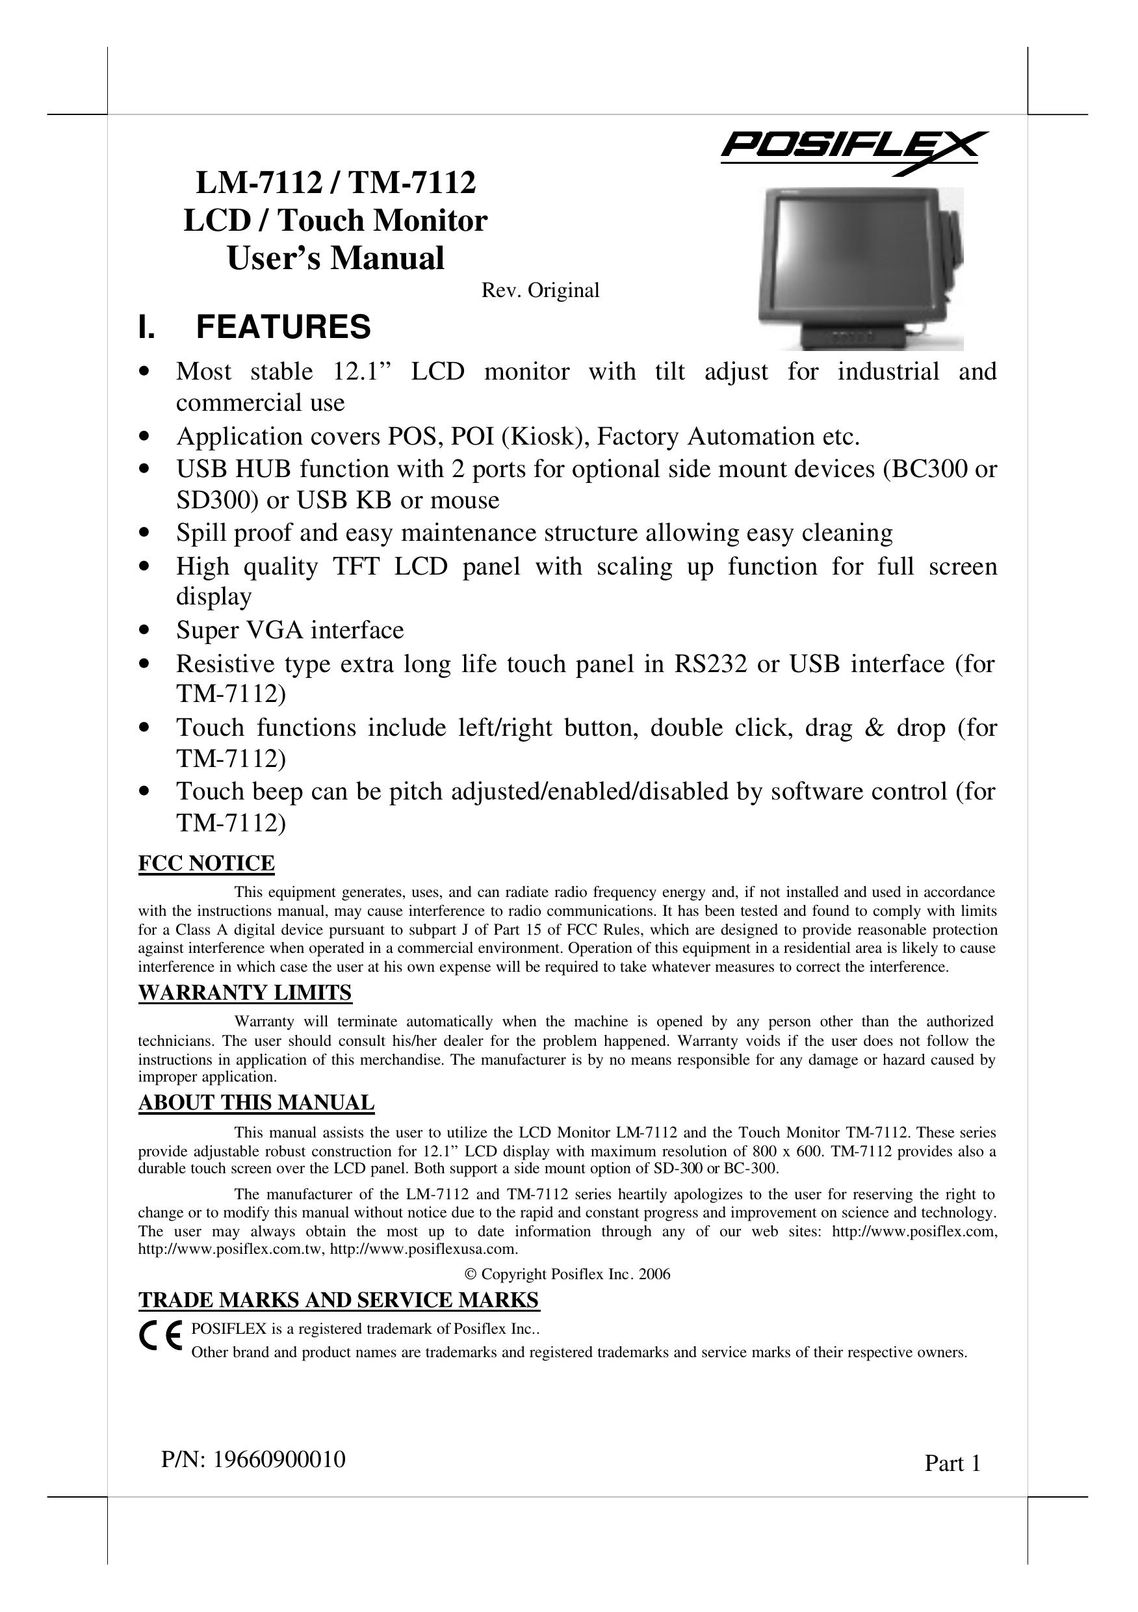 POSIFLEX Business Machines LM-7112 Computer Monitor User Manual